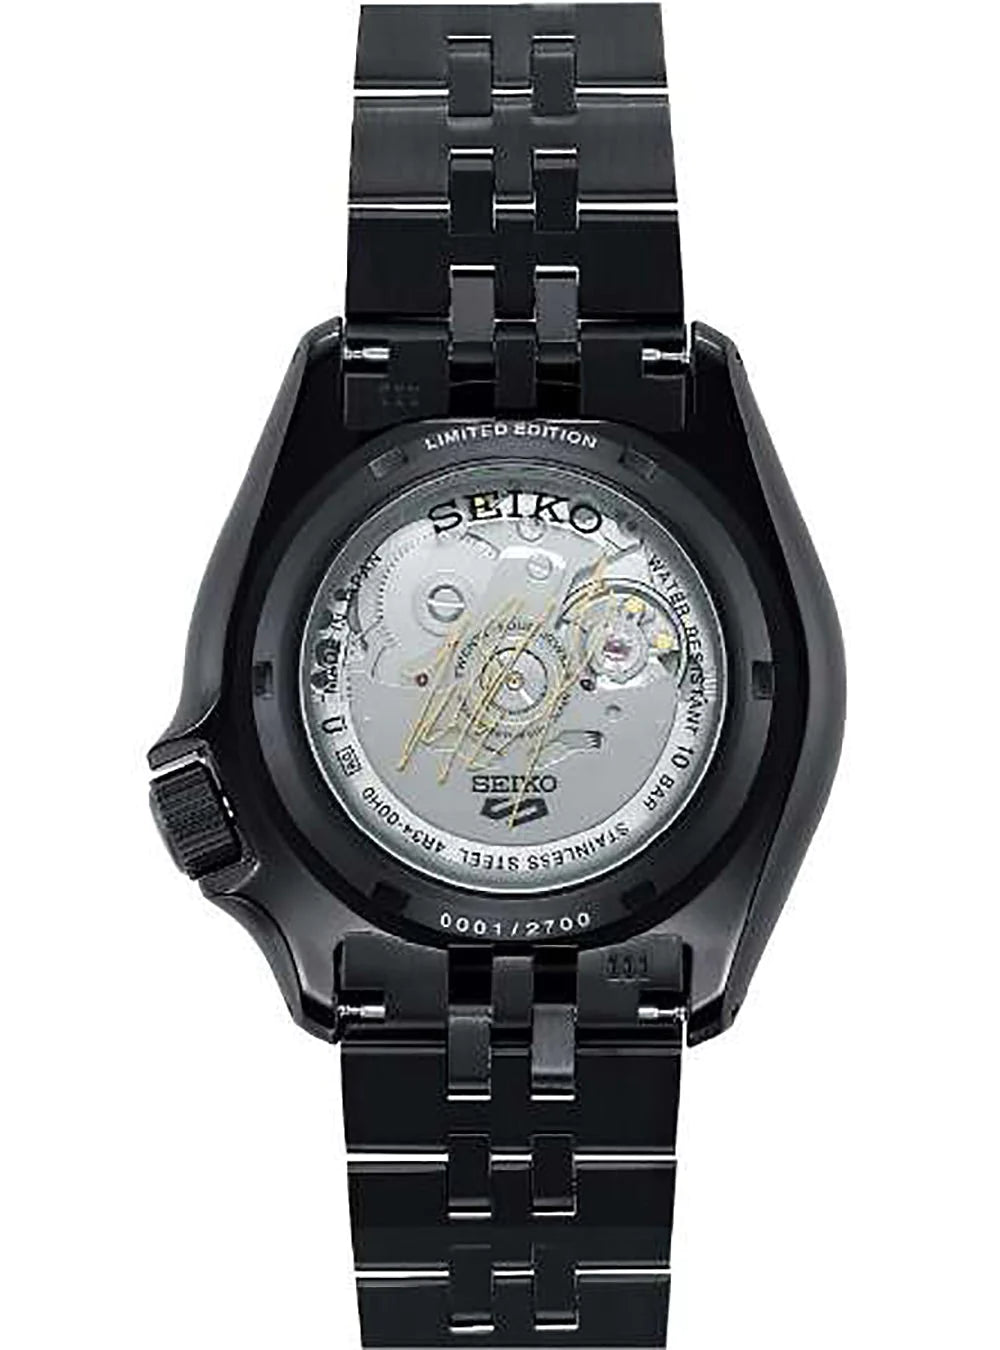 SEIKO 5 Sports Automatic GMT Yuto Horime Collaboration Limited Model SBSC015/SSK027